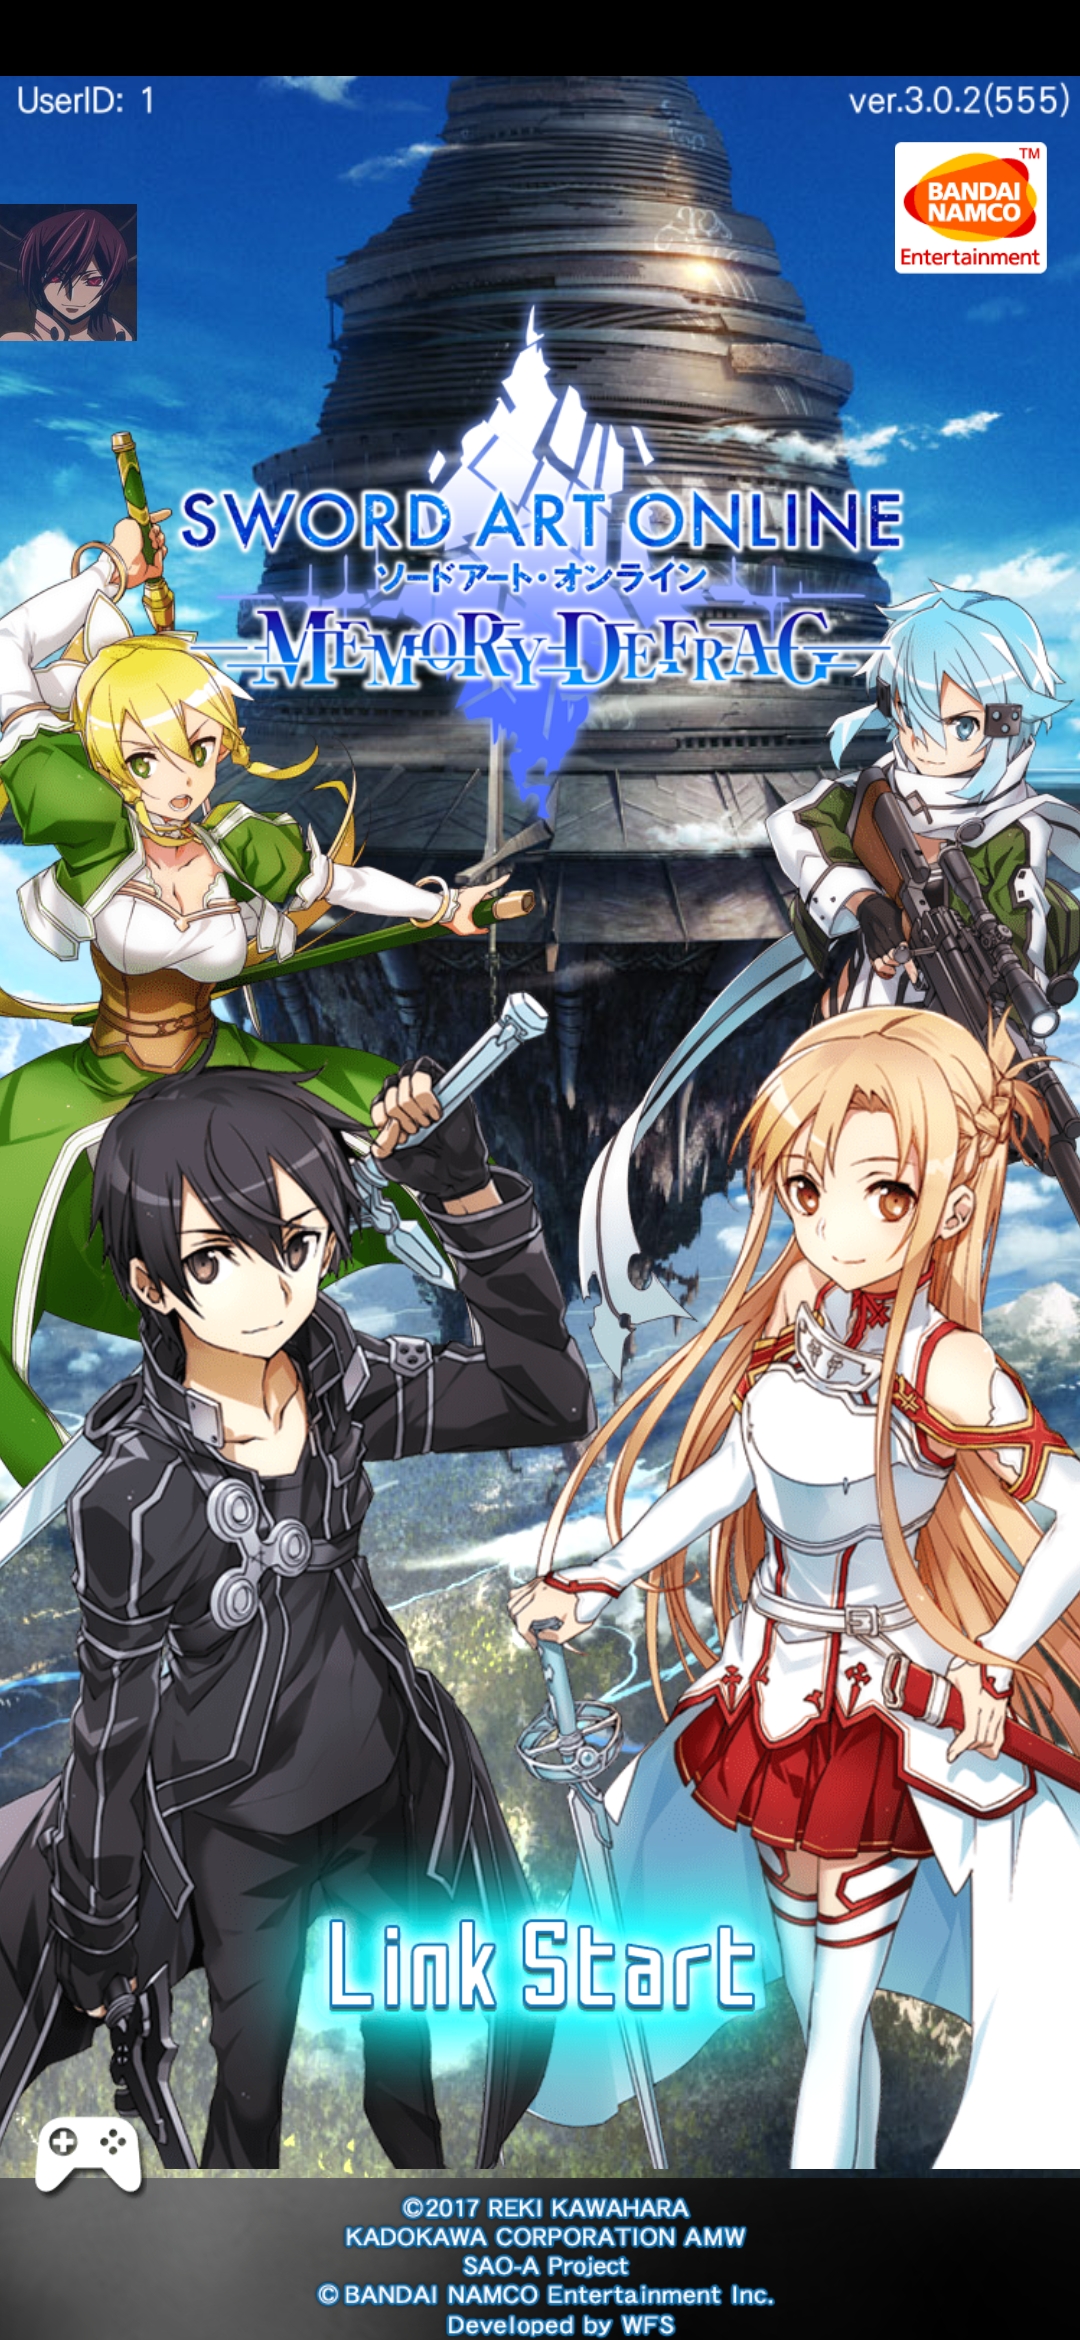 Game SWORD ART ONLINE: Memory Defrag Cho Android